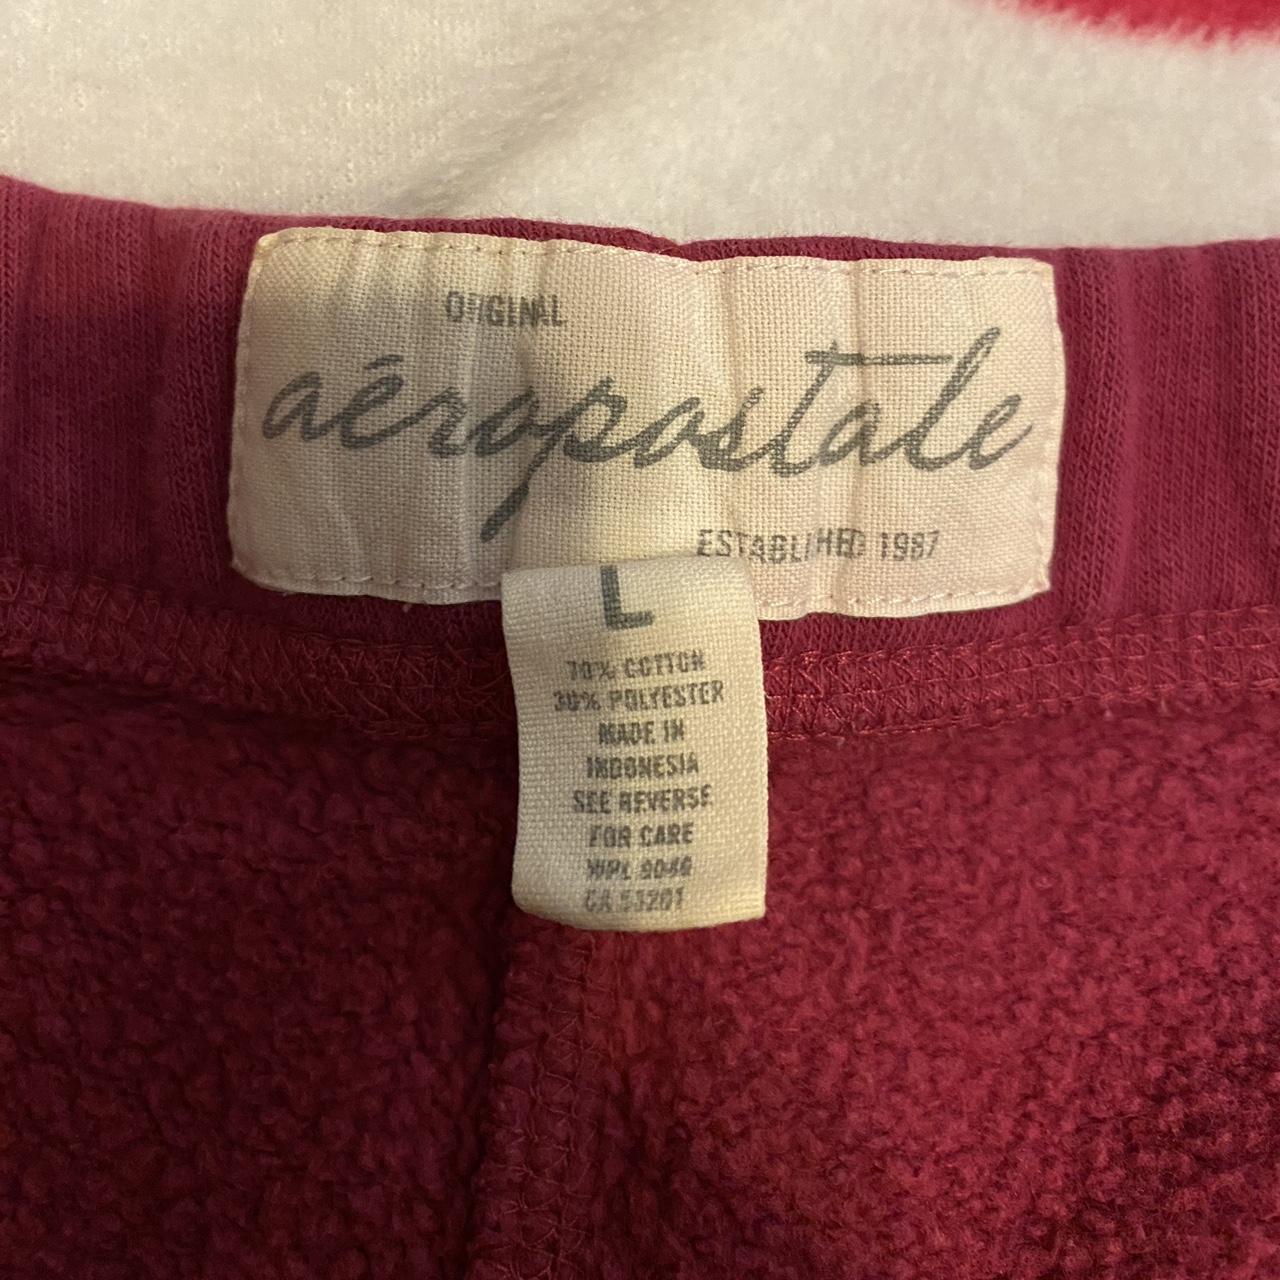 Aeropostale Women's Pink and White Joggers-tracksuits (6)